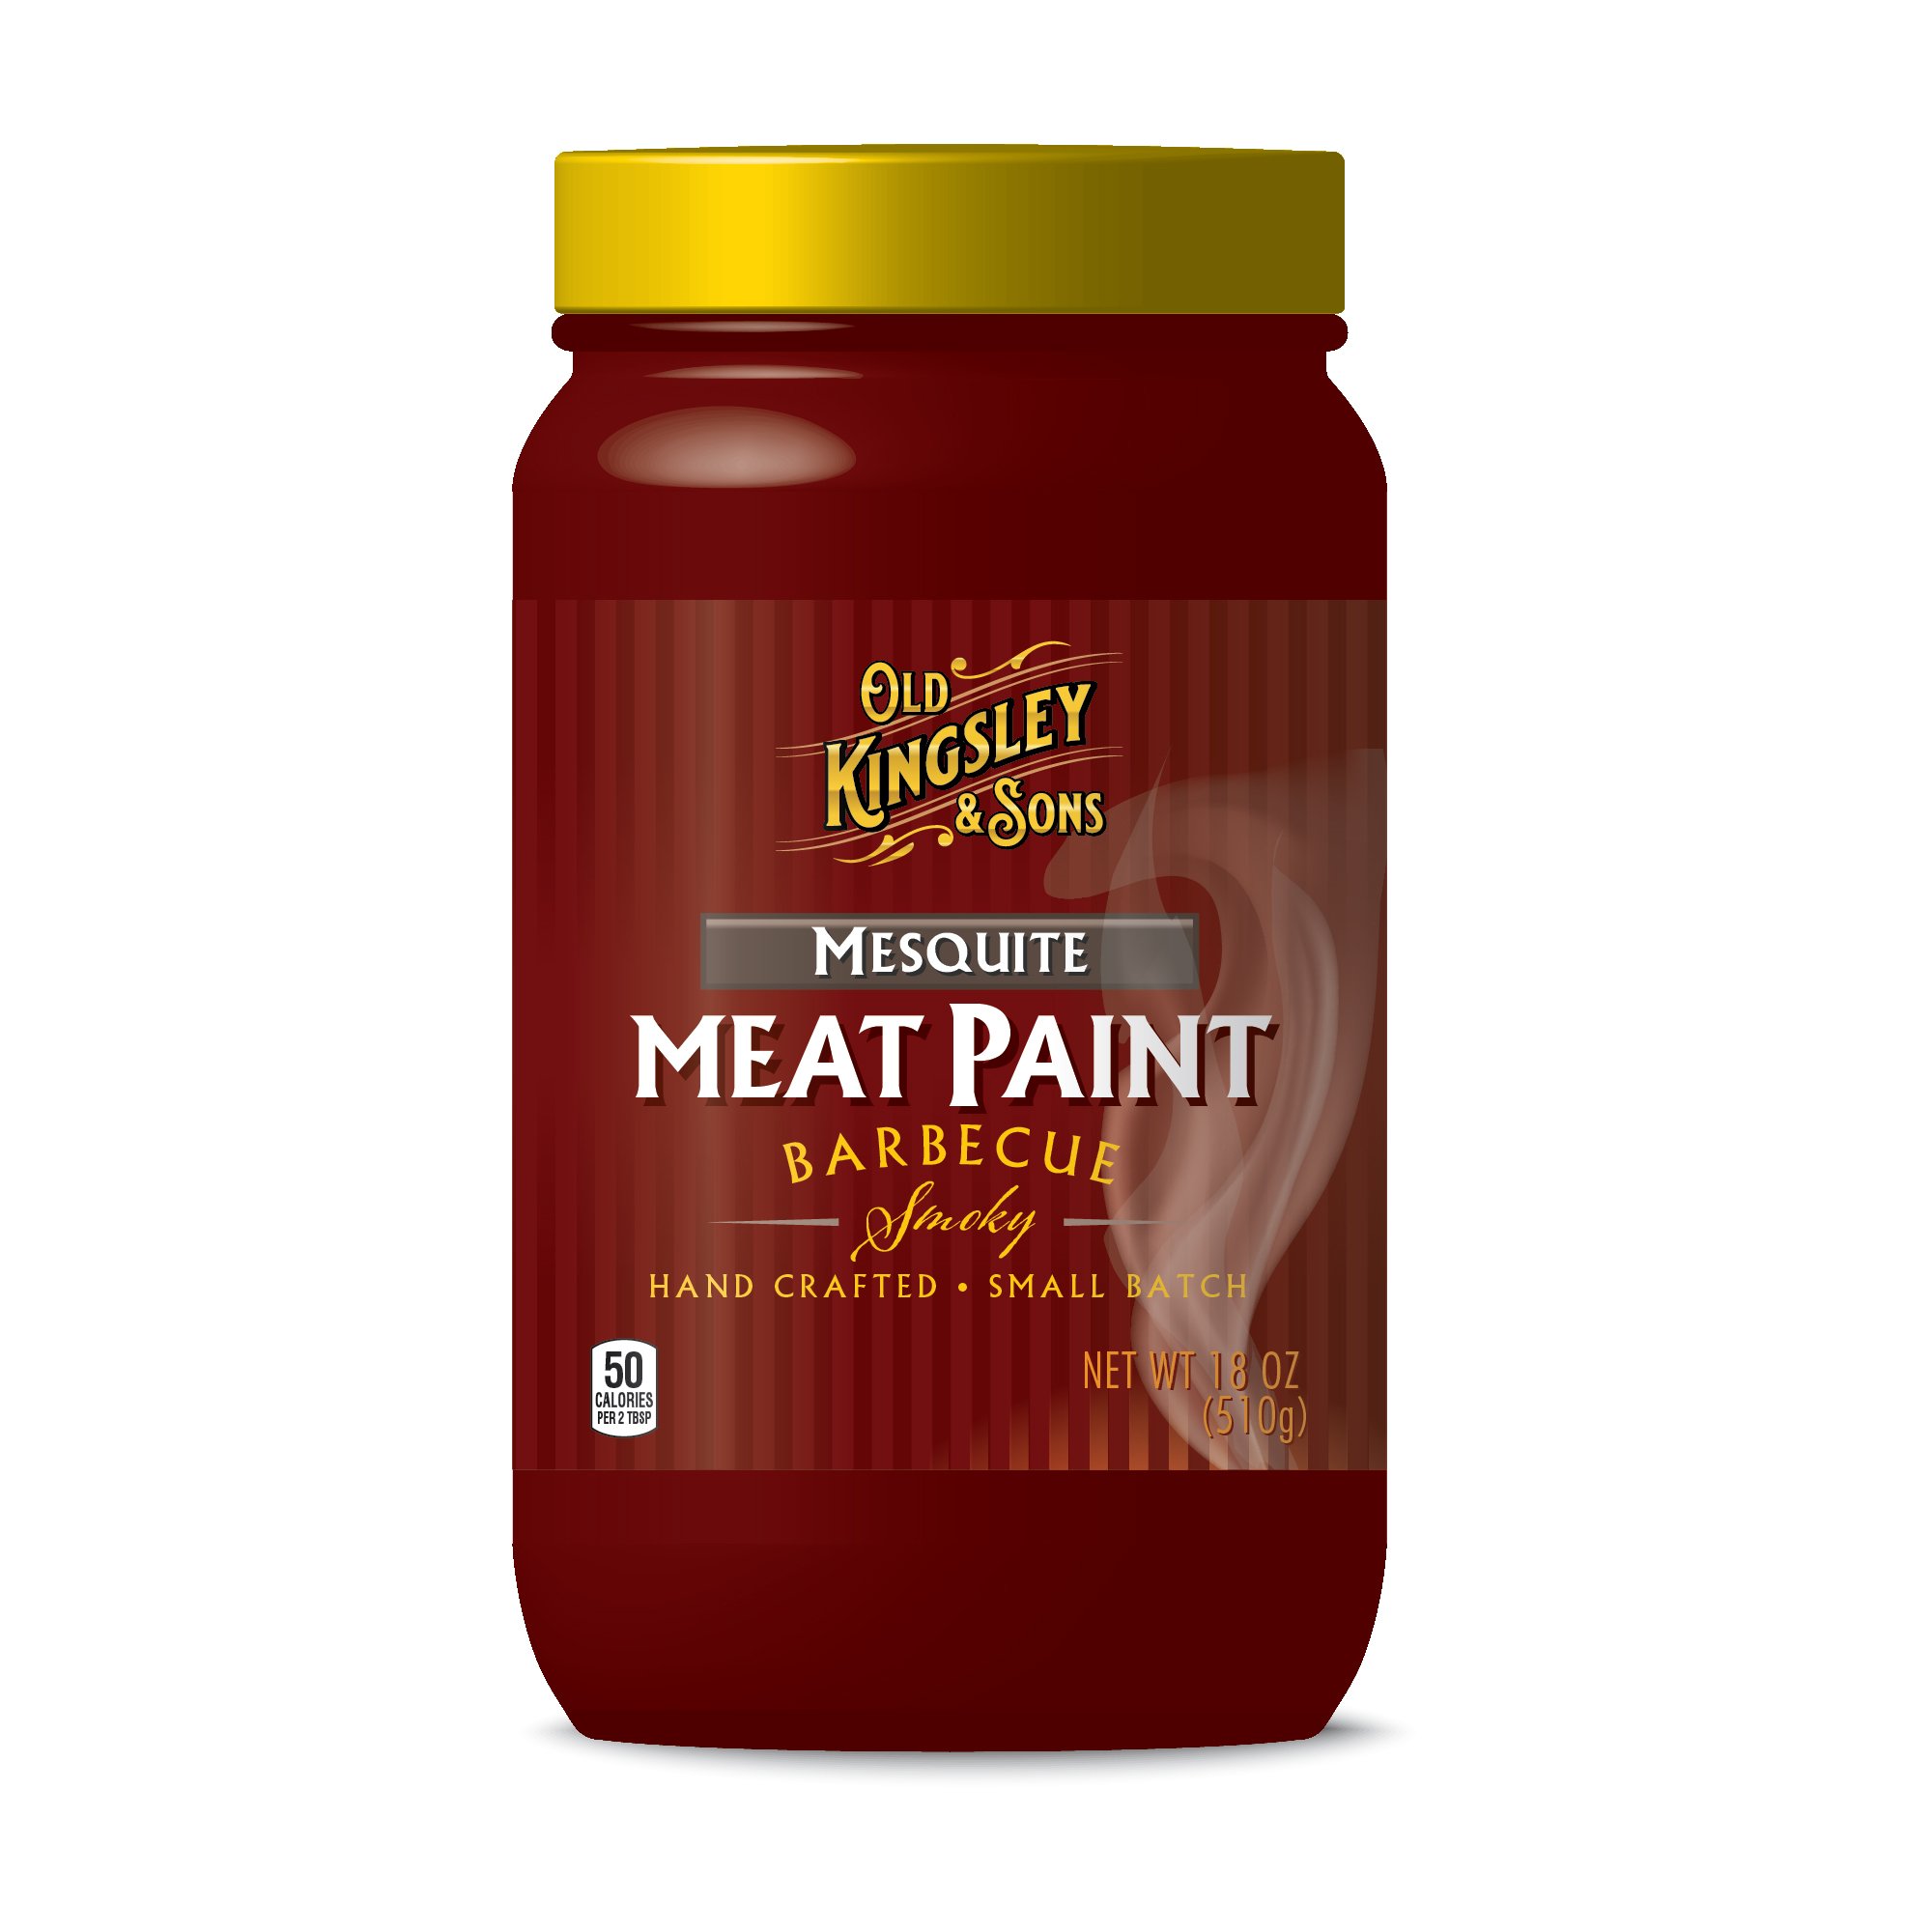 old kingsley sons meat paint mesquite Image at Dellaria's Gourmet Food